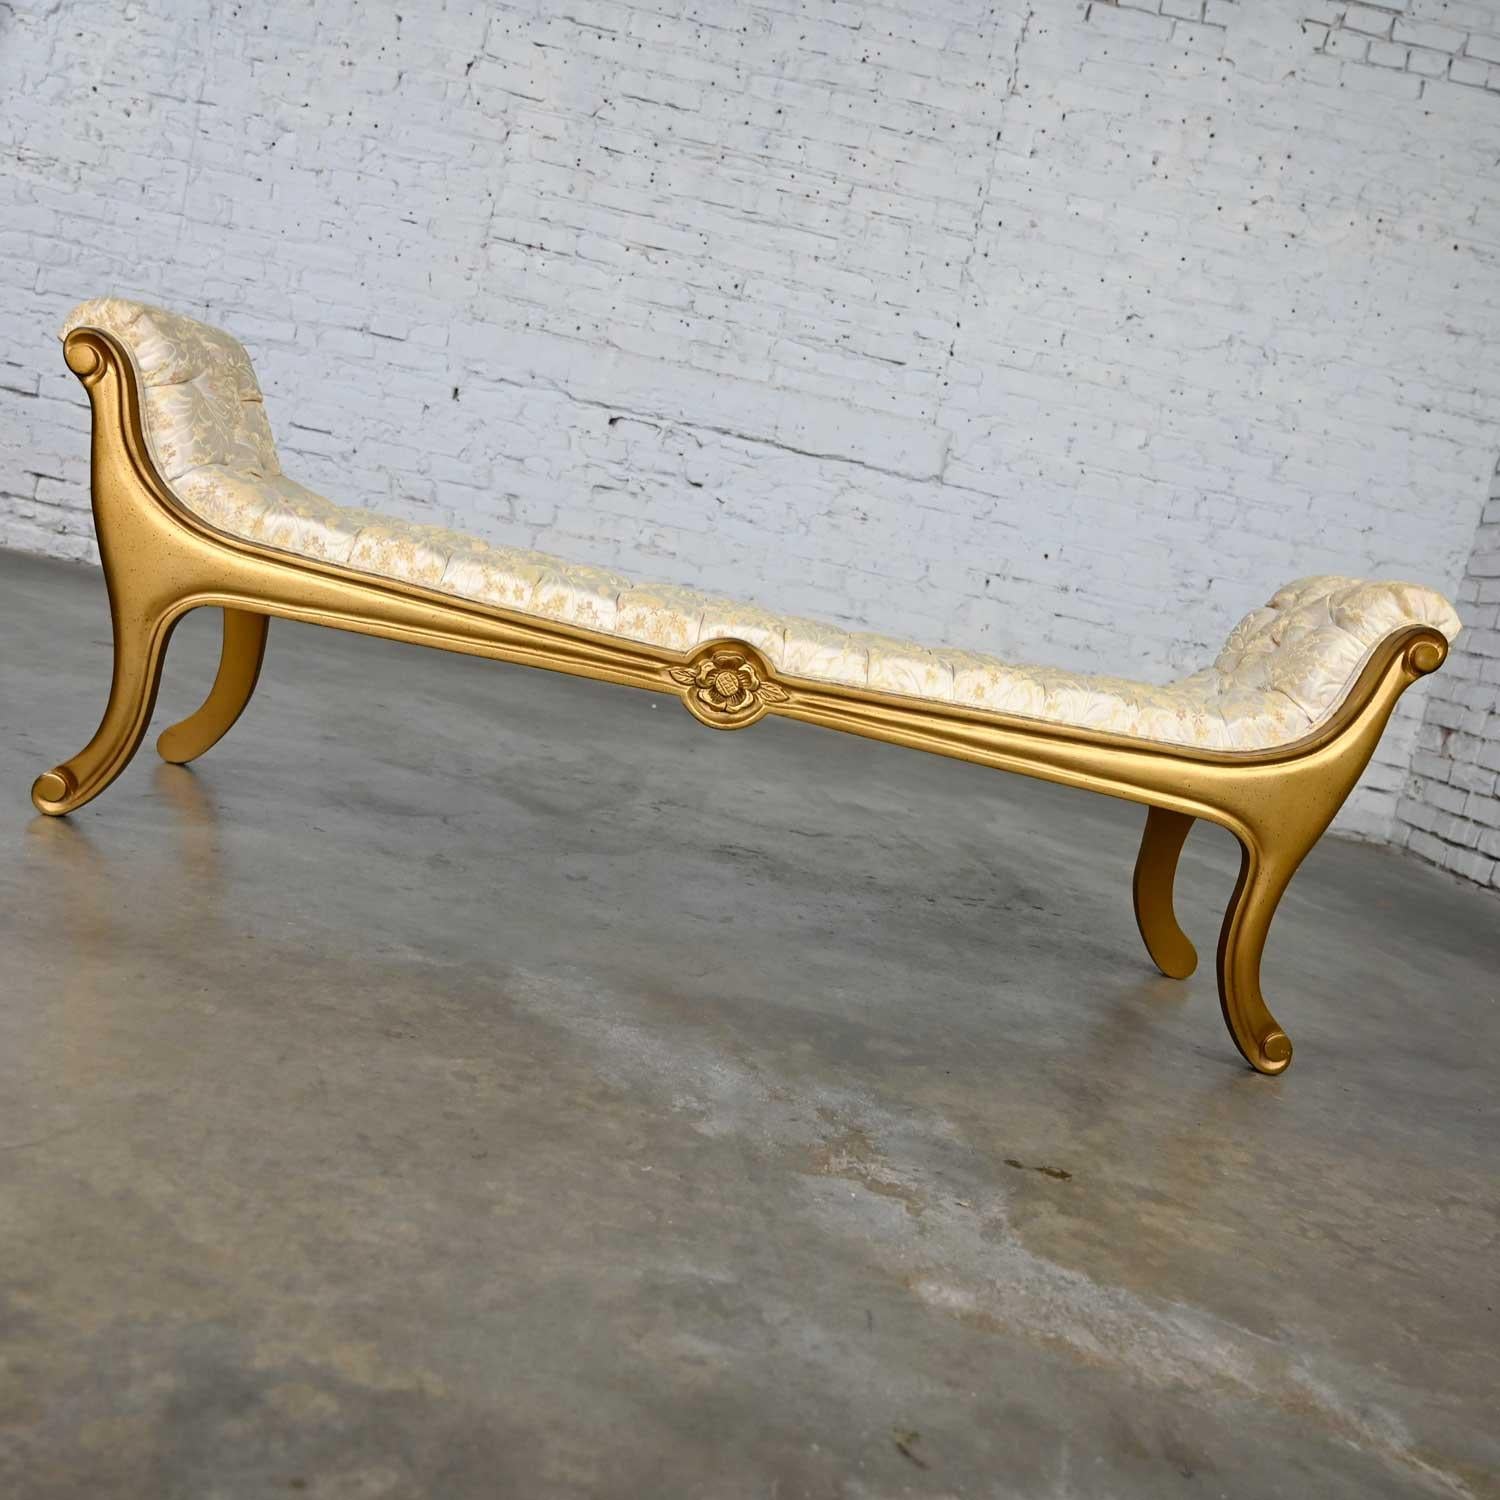 20th Century Hollywood Regency Upholstered Gilded Gondola Bench Attributed to Prince Howard